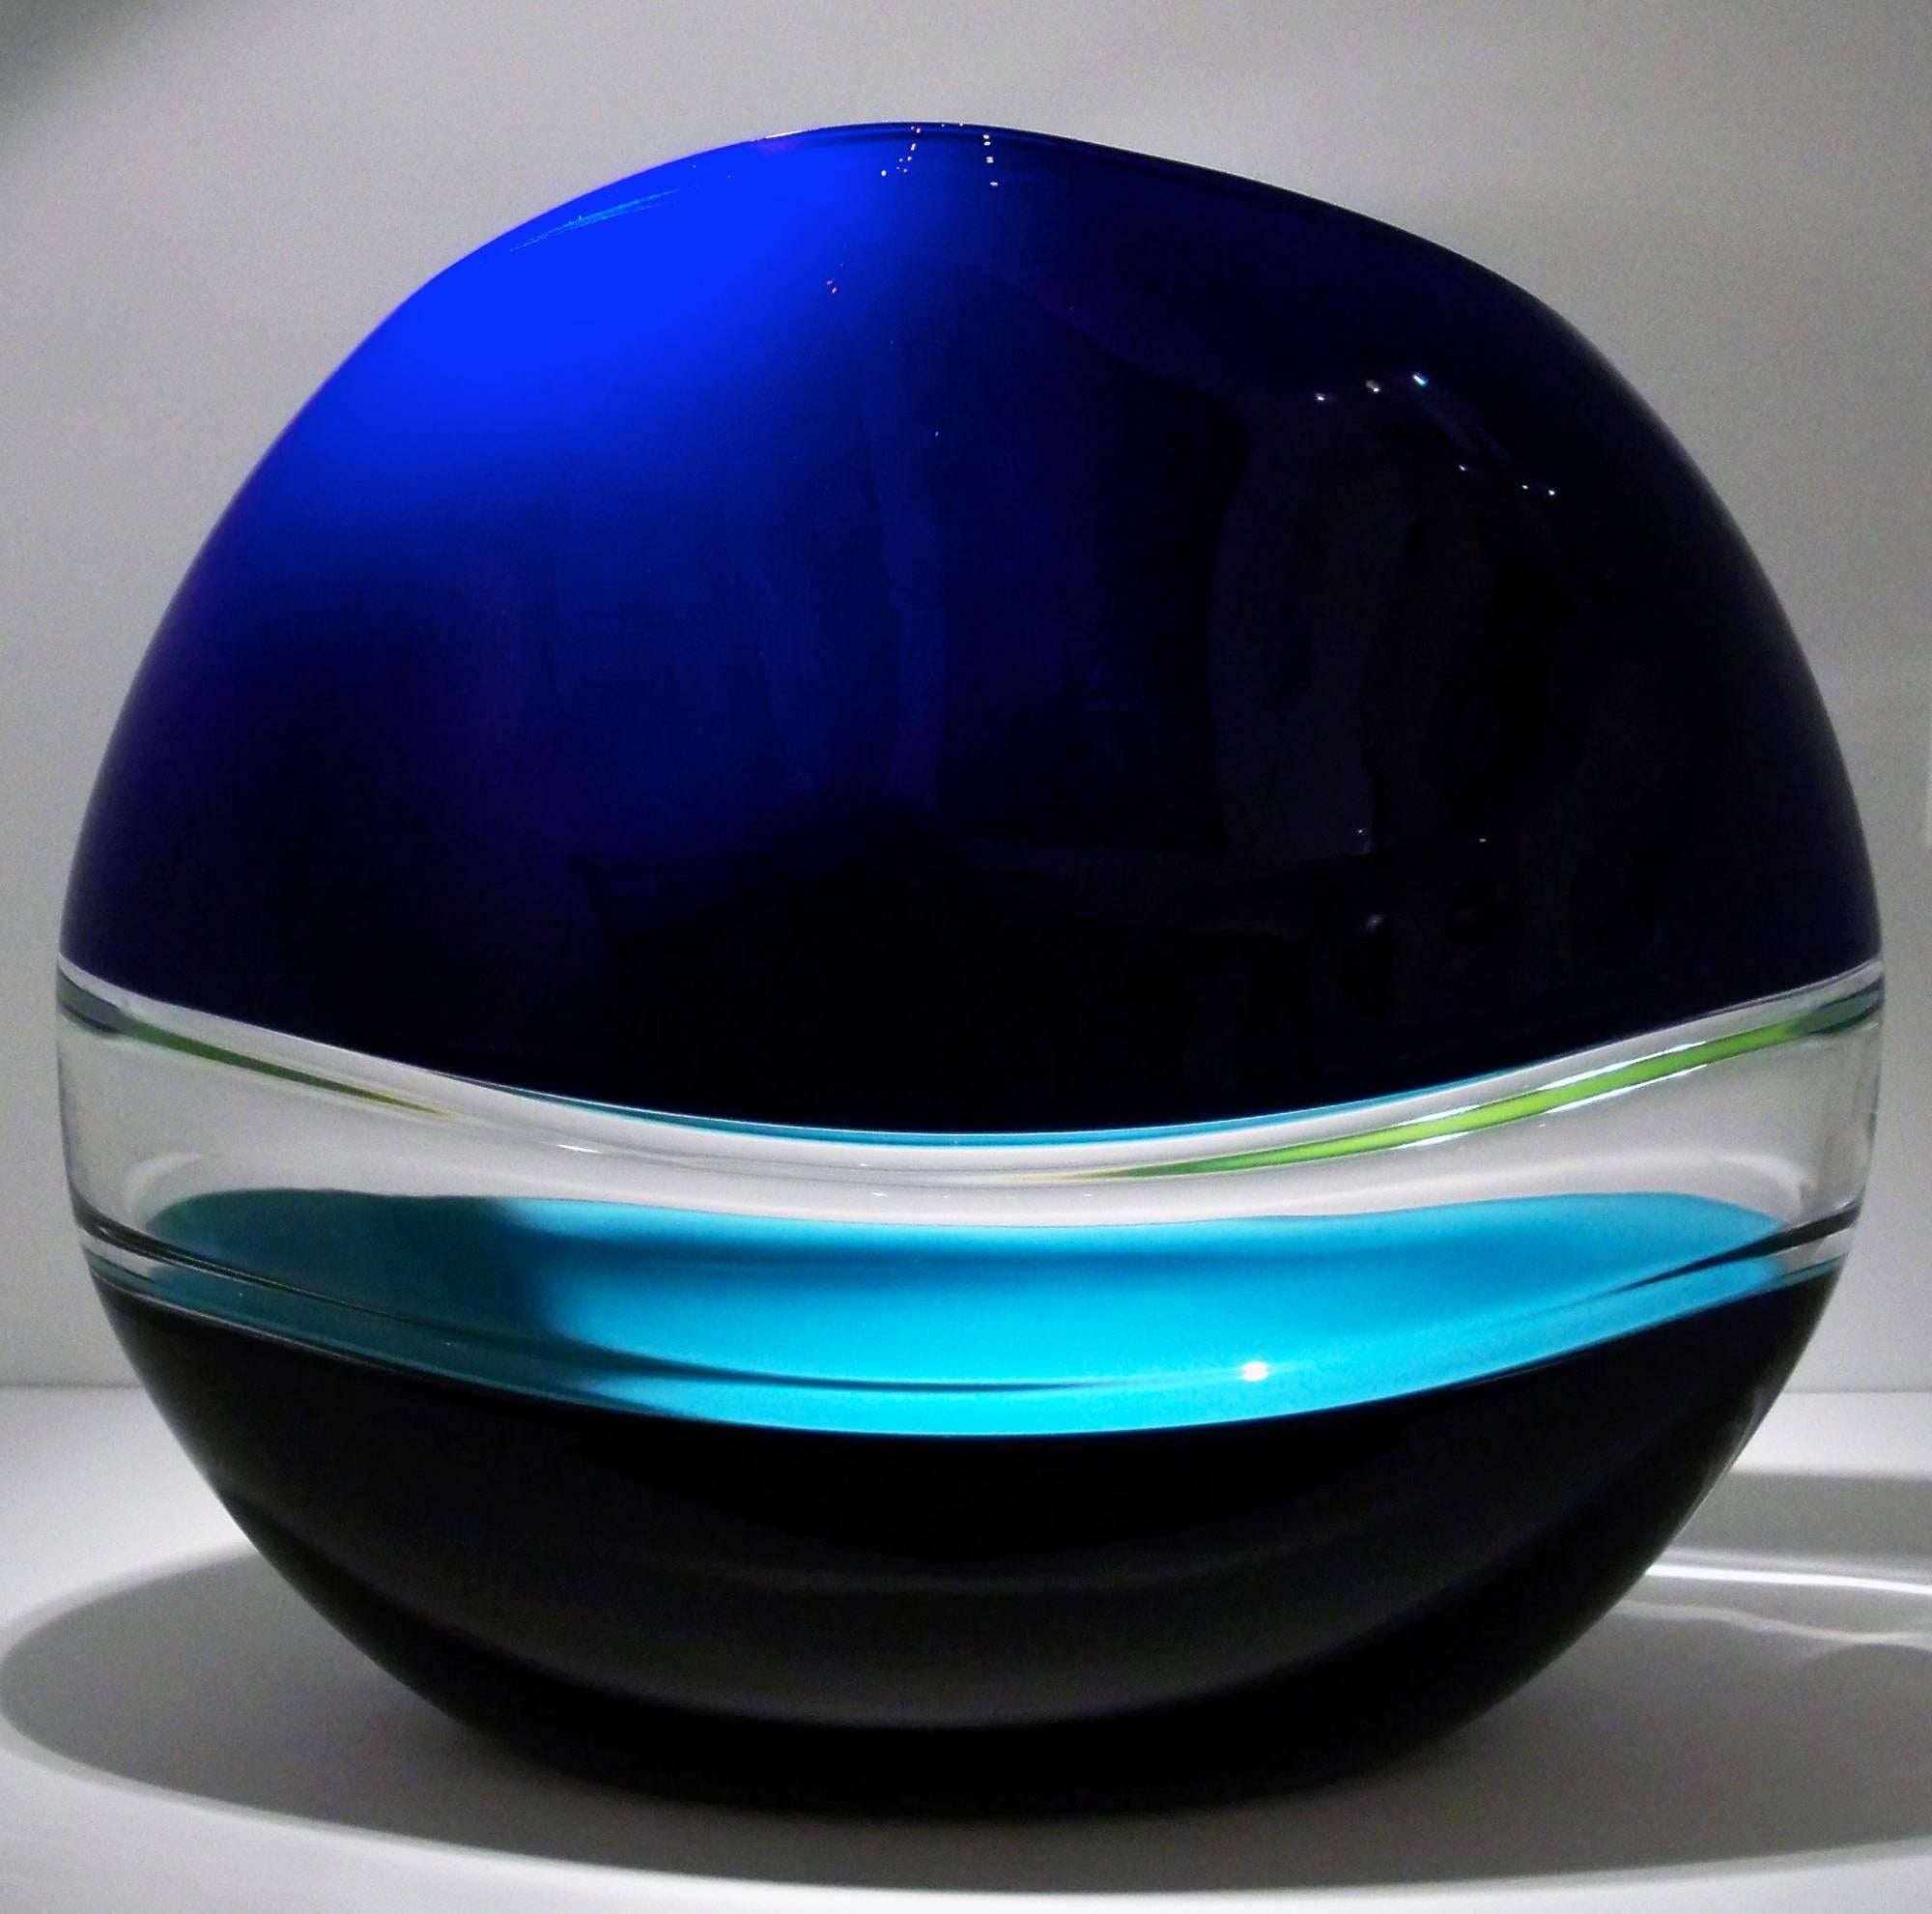 Jamie Harris straddles the disciplines of painting and glass blowing approaching his work, “more from a painterly perspective than as a traditional glassblower.” His work is primarily about something simple: ”loud splashes of color, capturing the